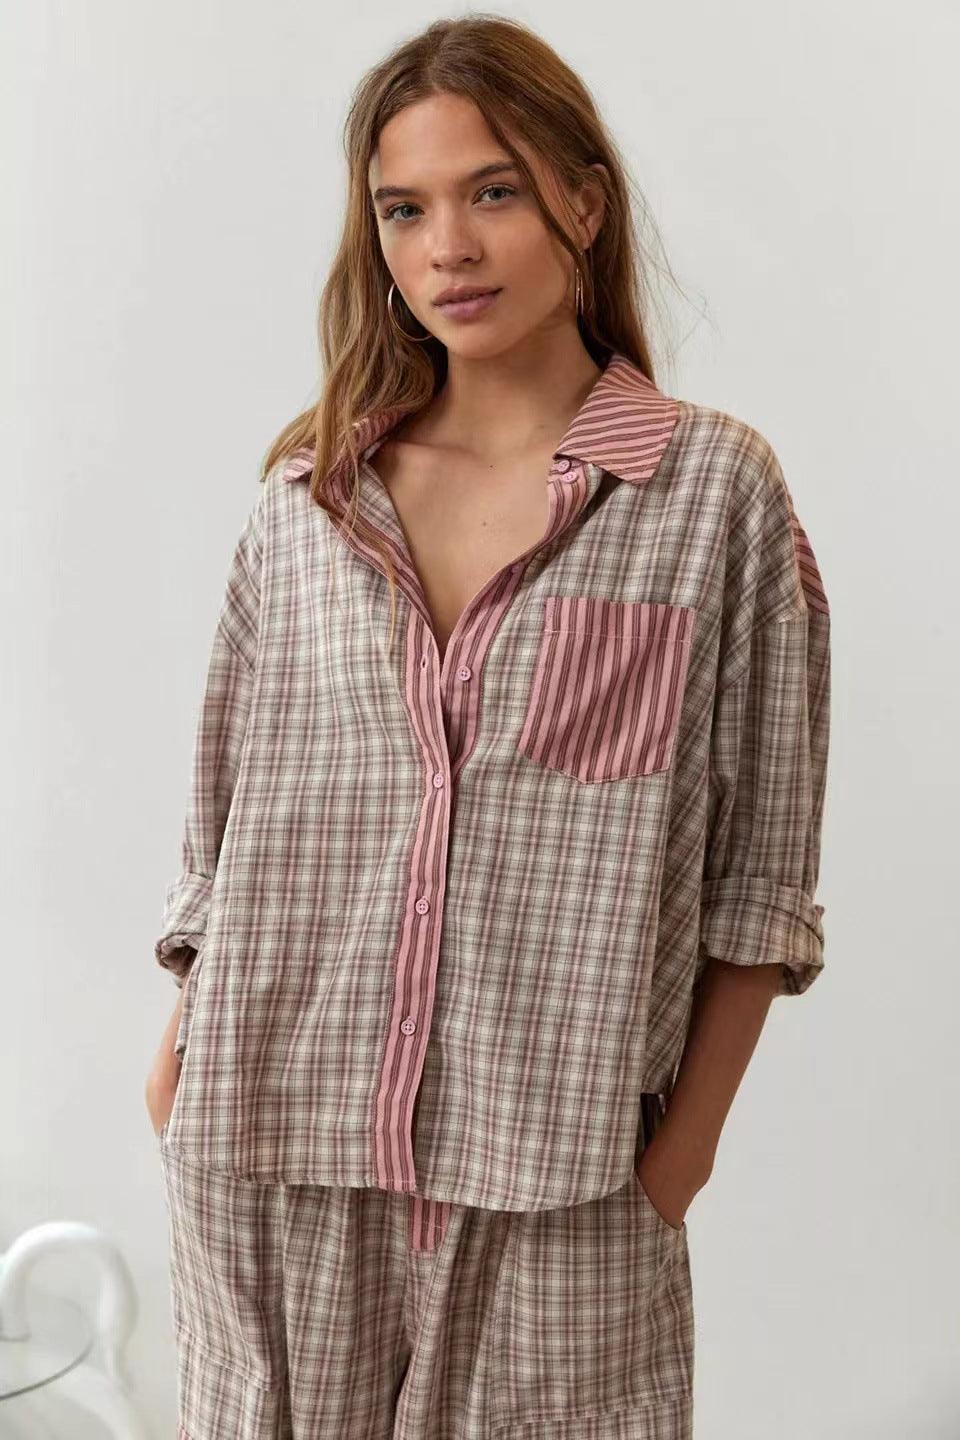 Women's Clothing Casual Plaid Shirt Outfit Dresses & Tops